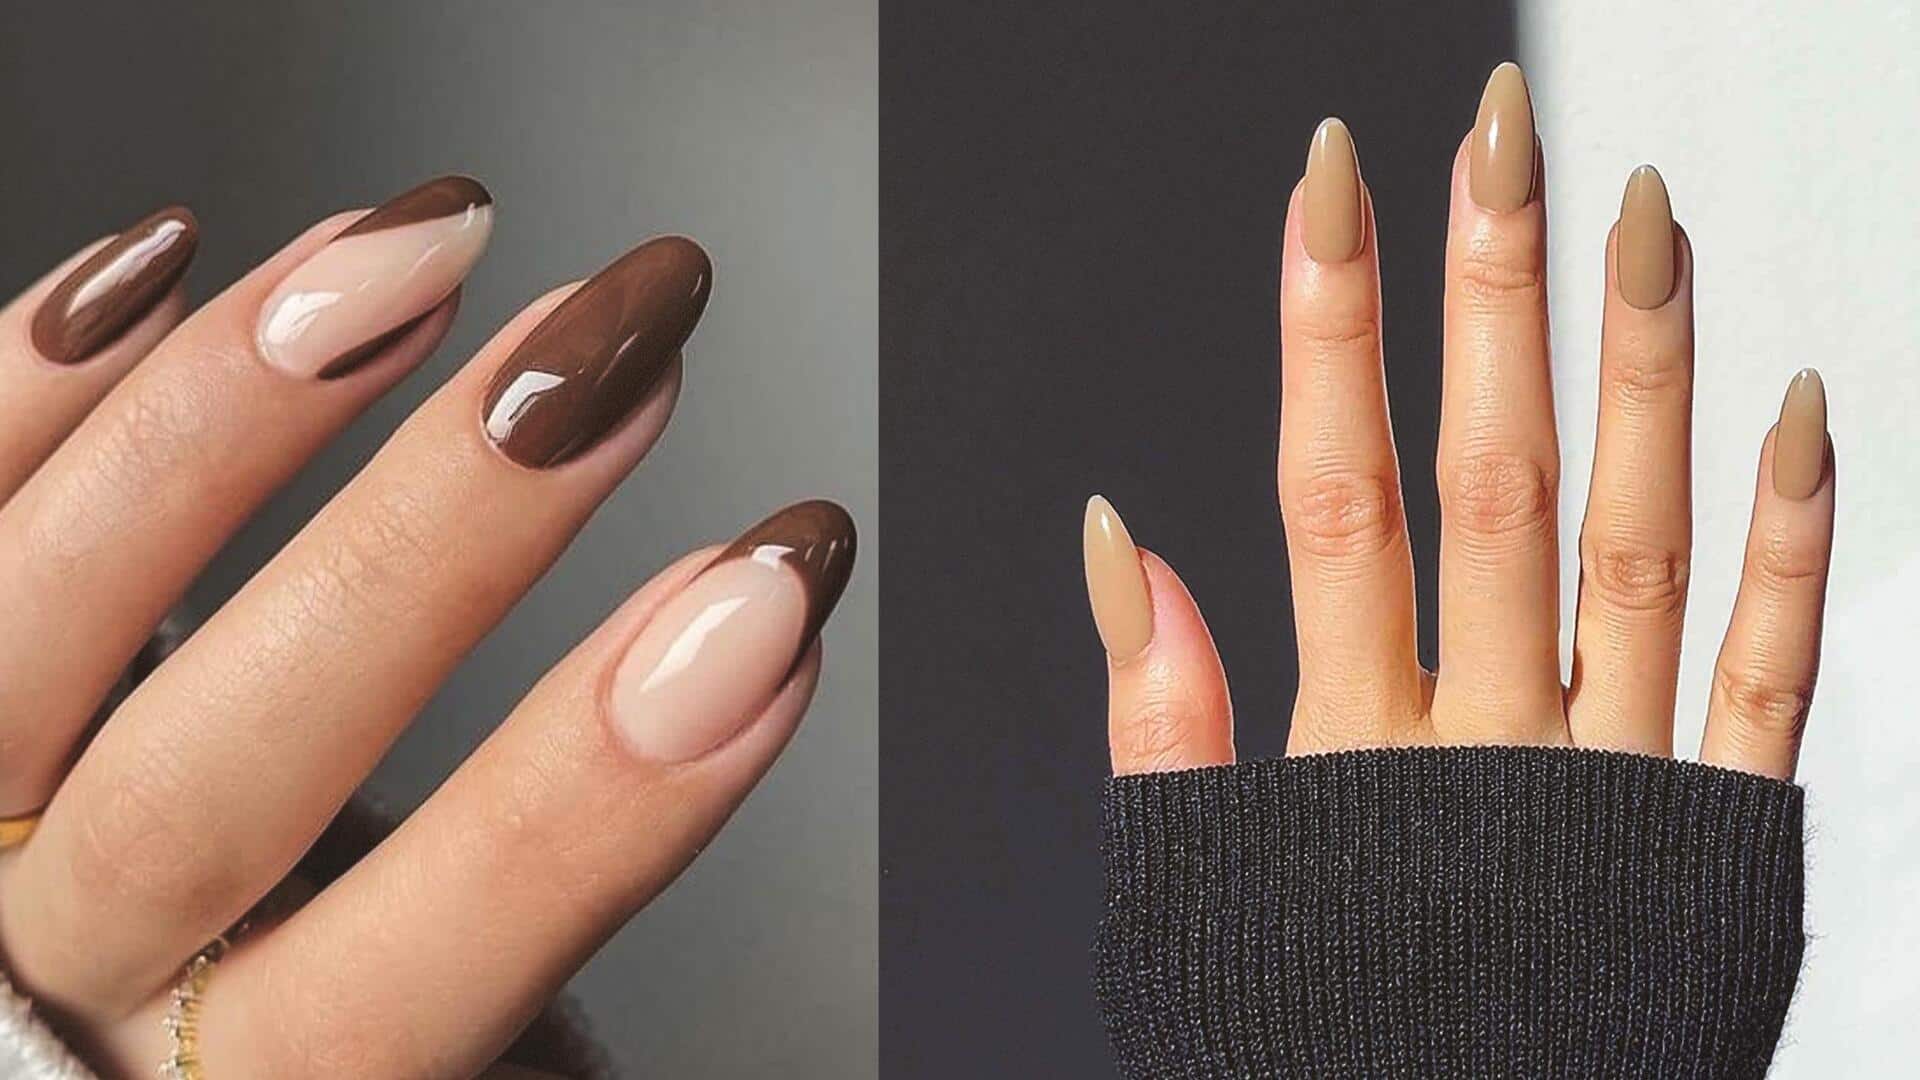 Chocolate milk French manicure: The sweet trend at your fingertips